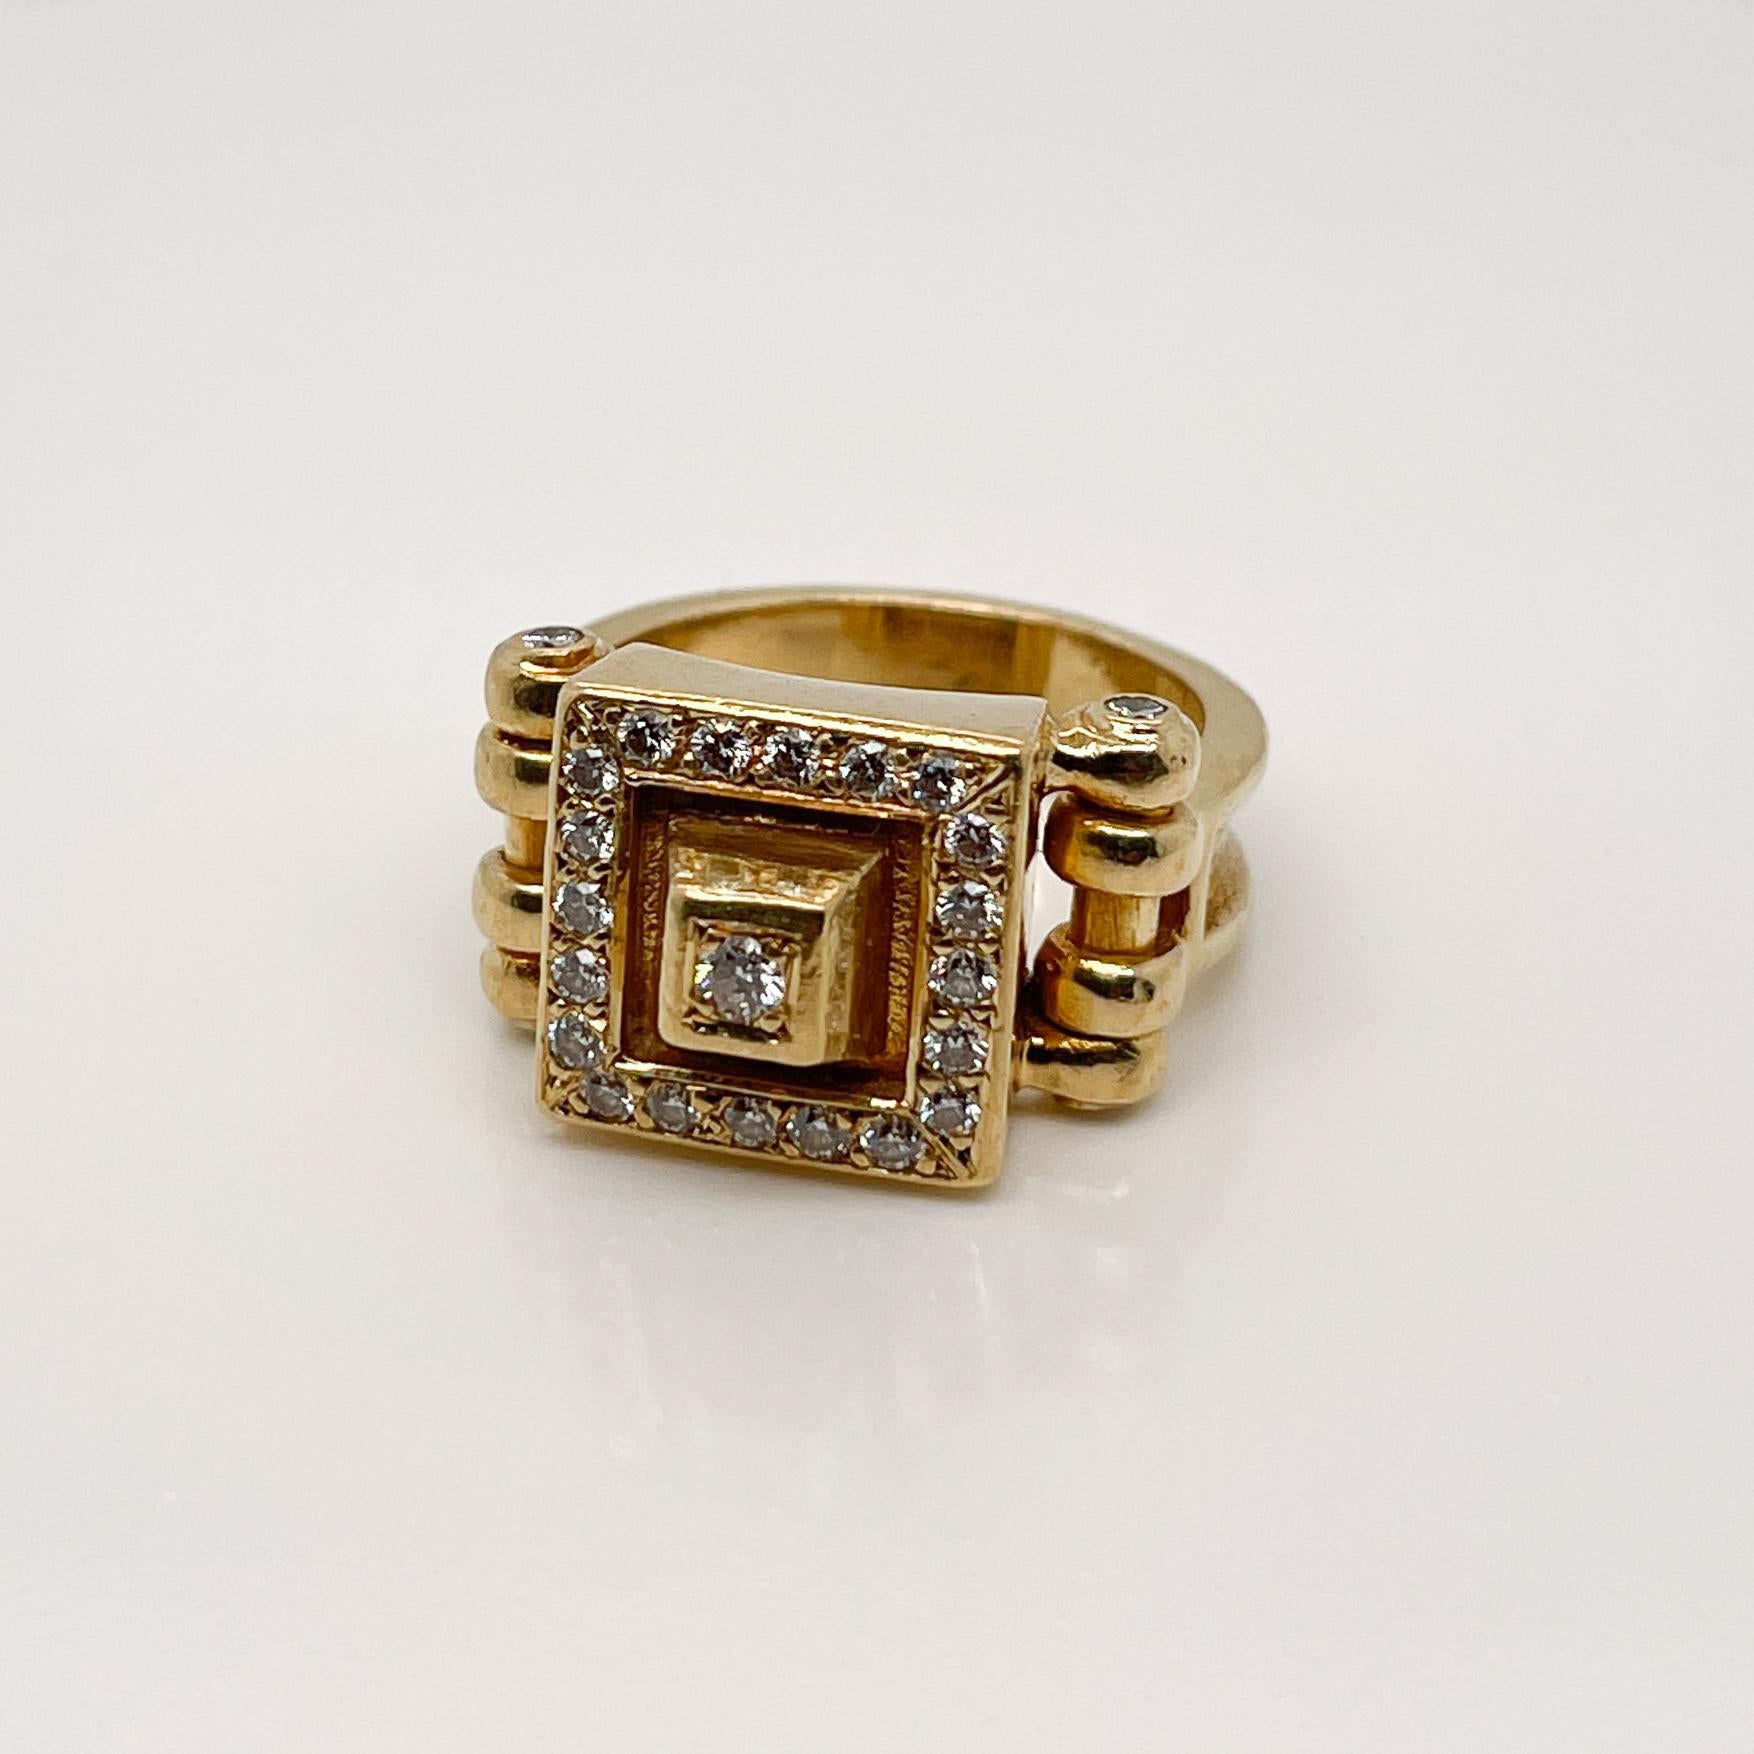 A very fine signed designer 18k gold and diamond signet style ring.

In the Art Deco style with a stylized Pyramid shaped head and pave set throughout with round brilliant cut white diamonds.

Illegiblely marked and likely Swiss or German.

Simply a